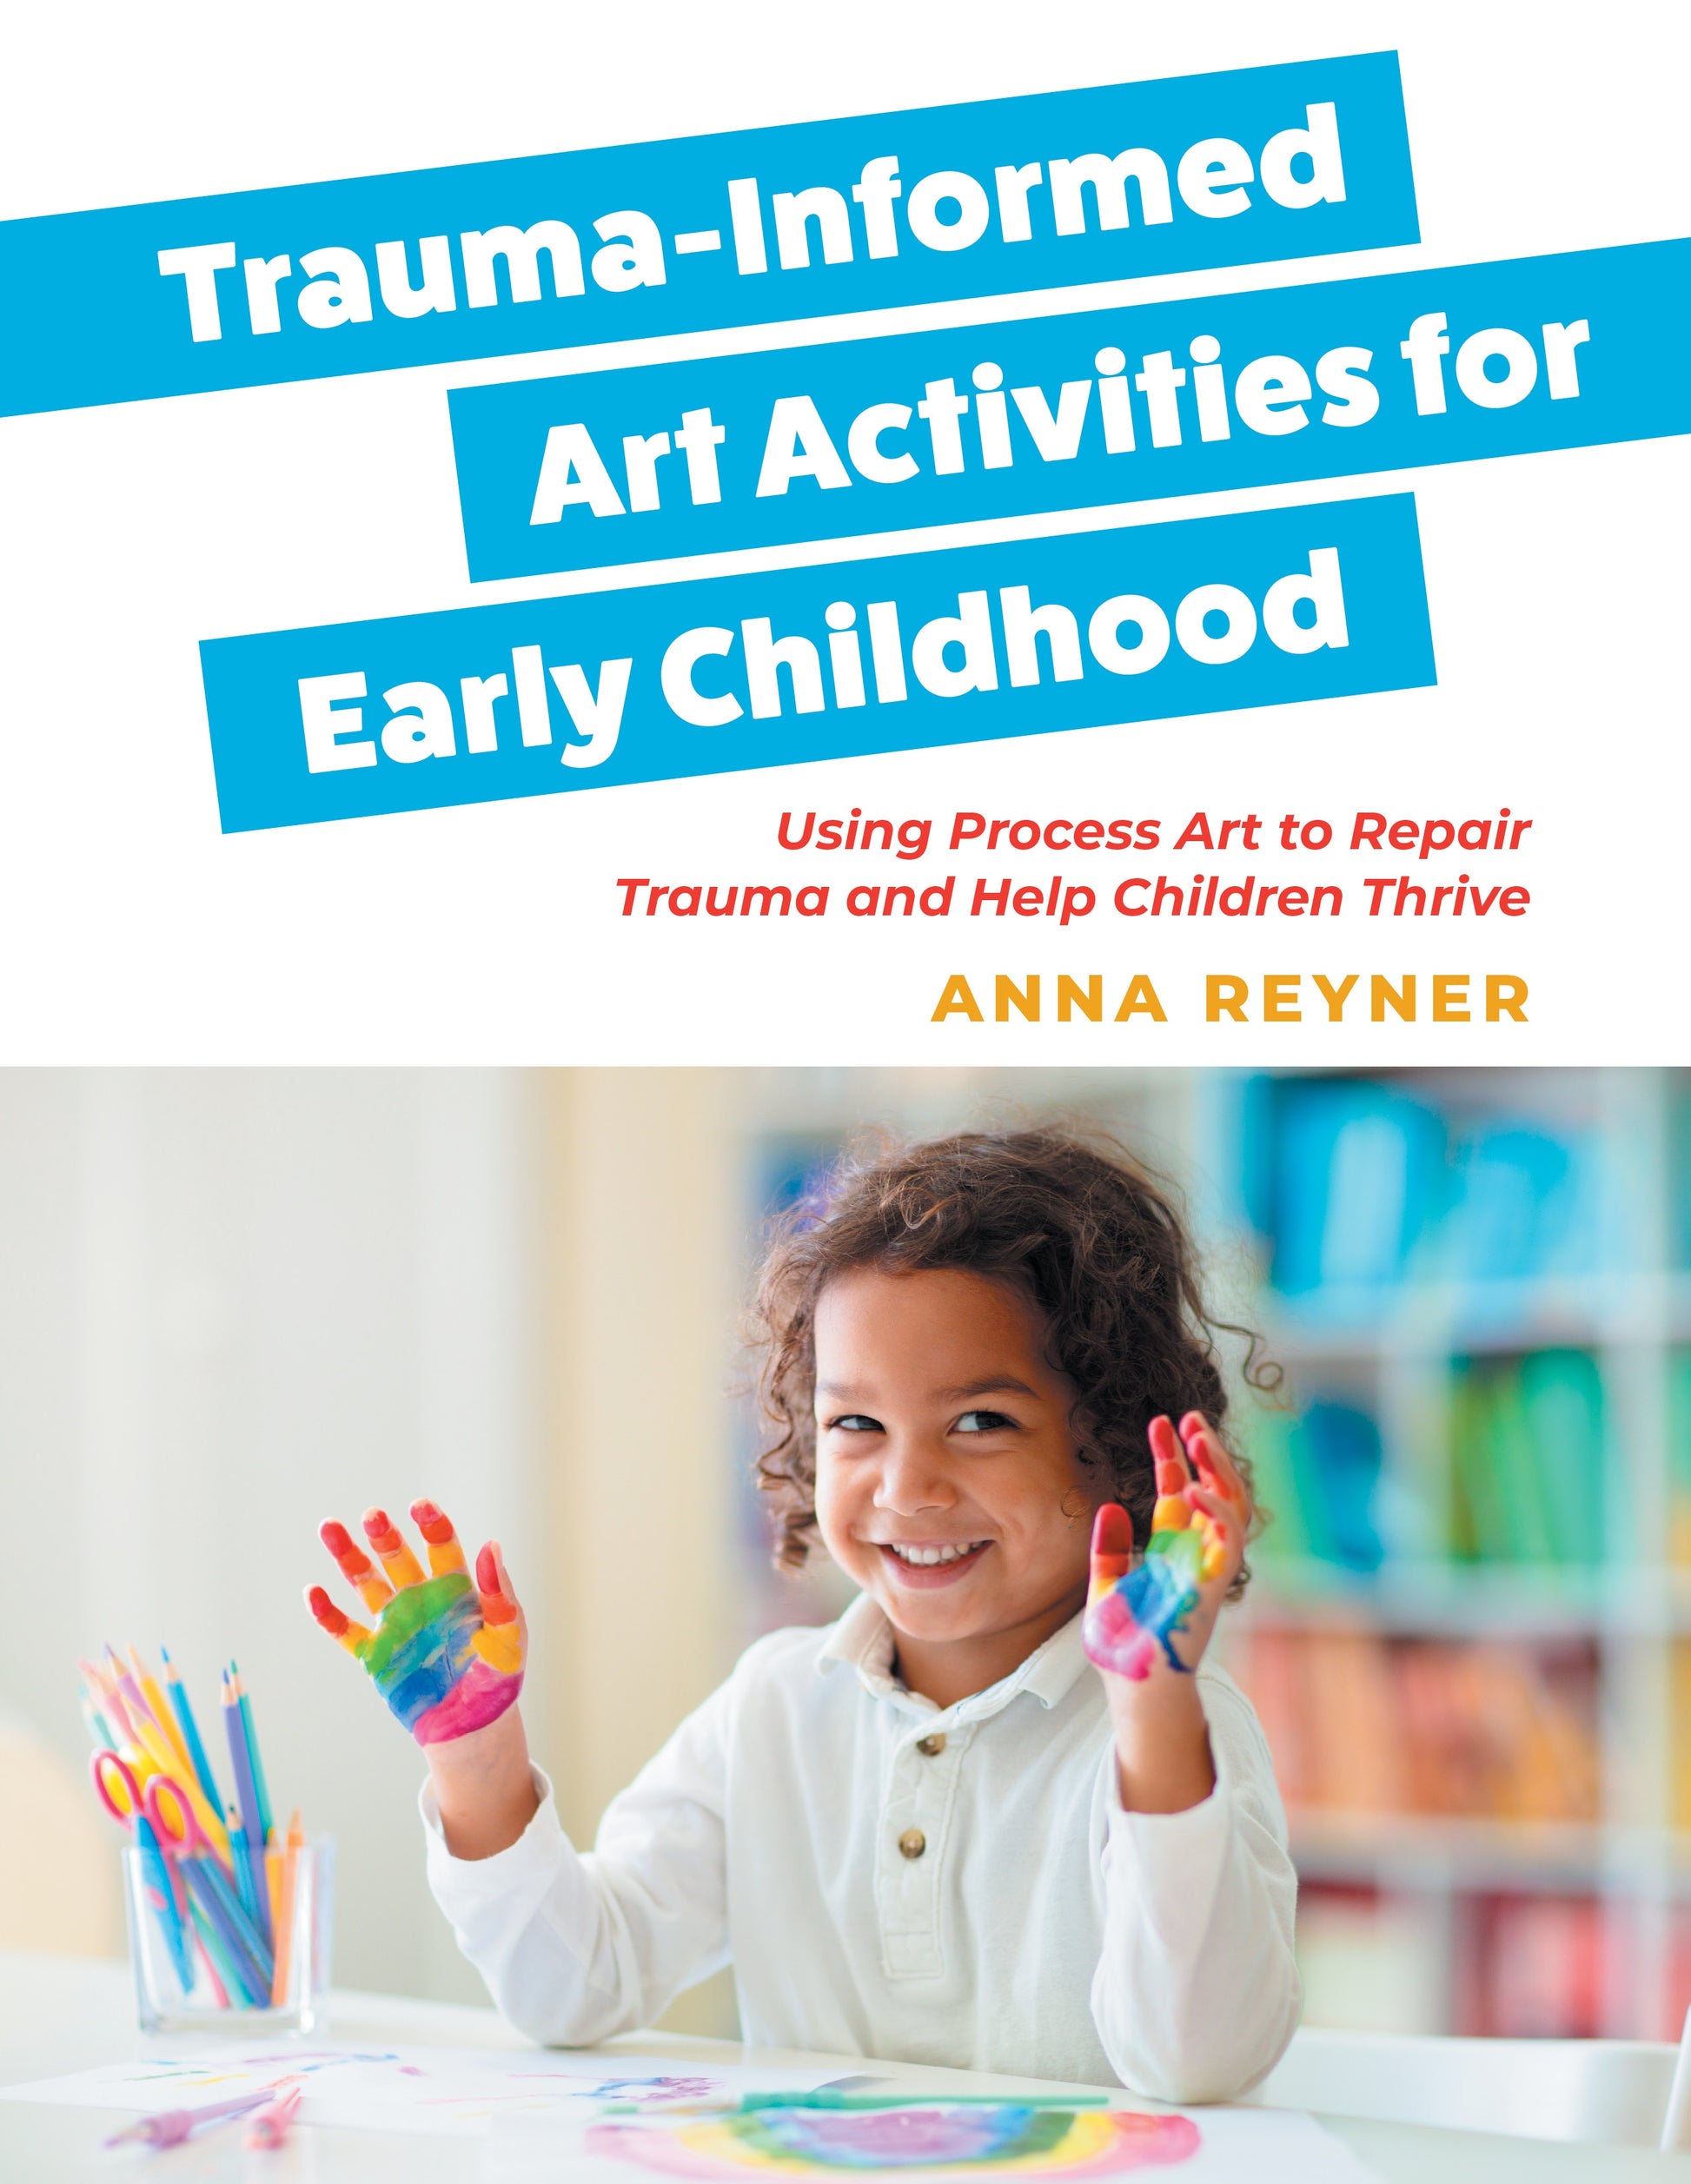 Trauma-Informed Art Activities for Early Childhood by Anna Reyner